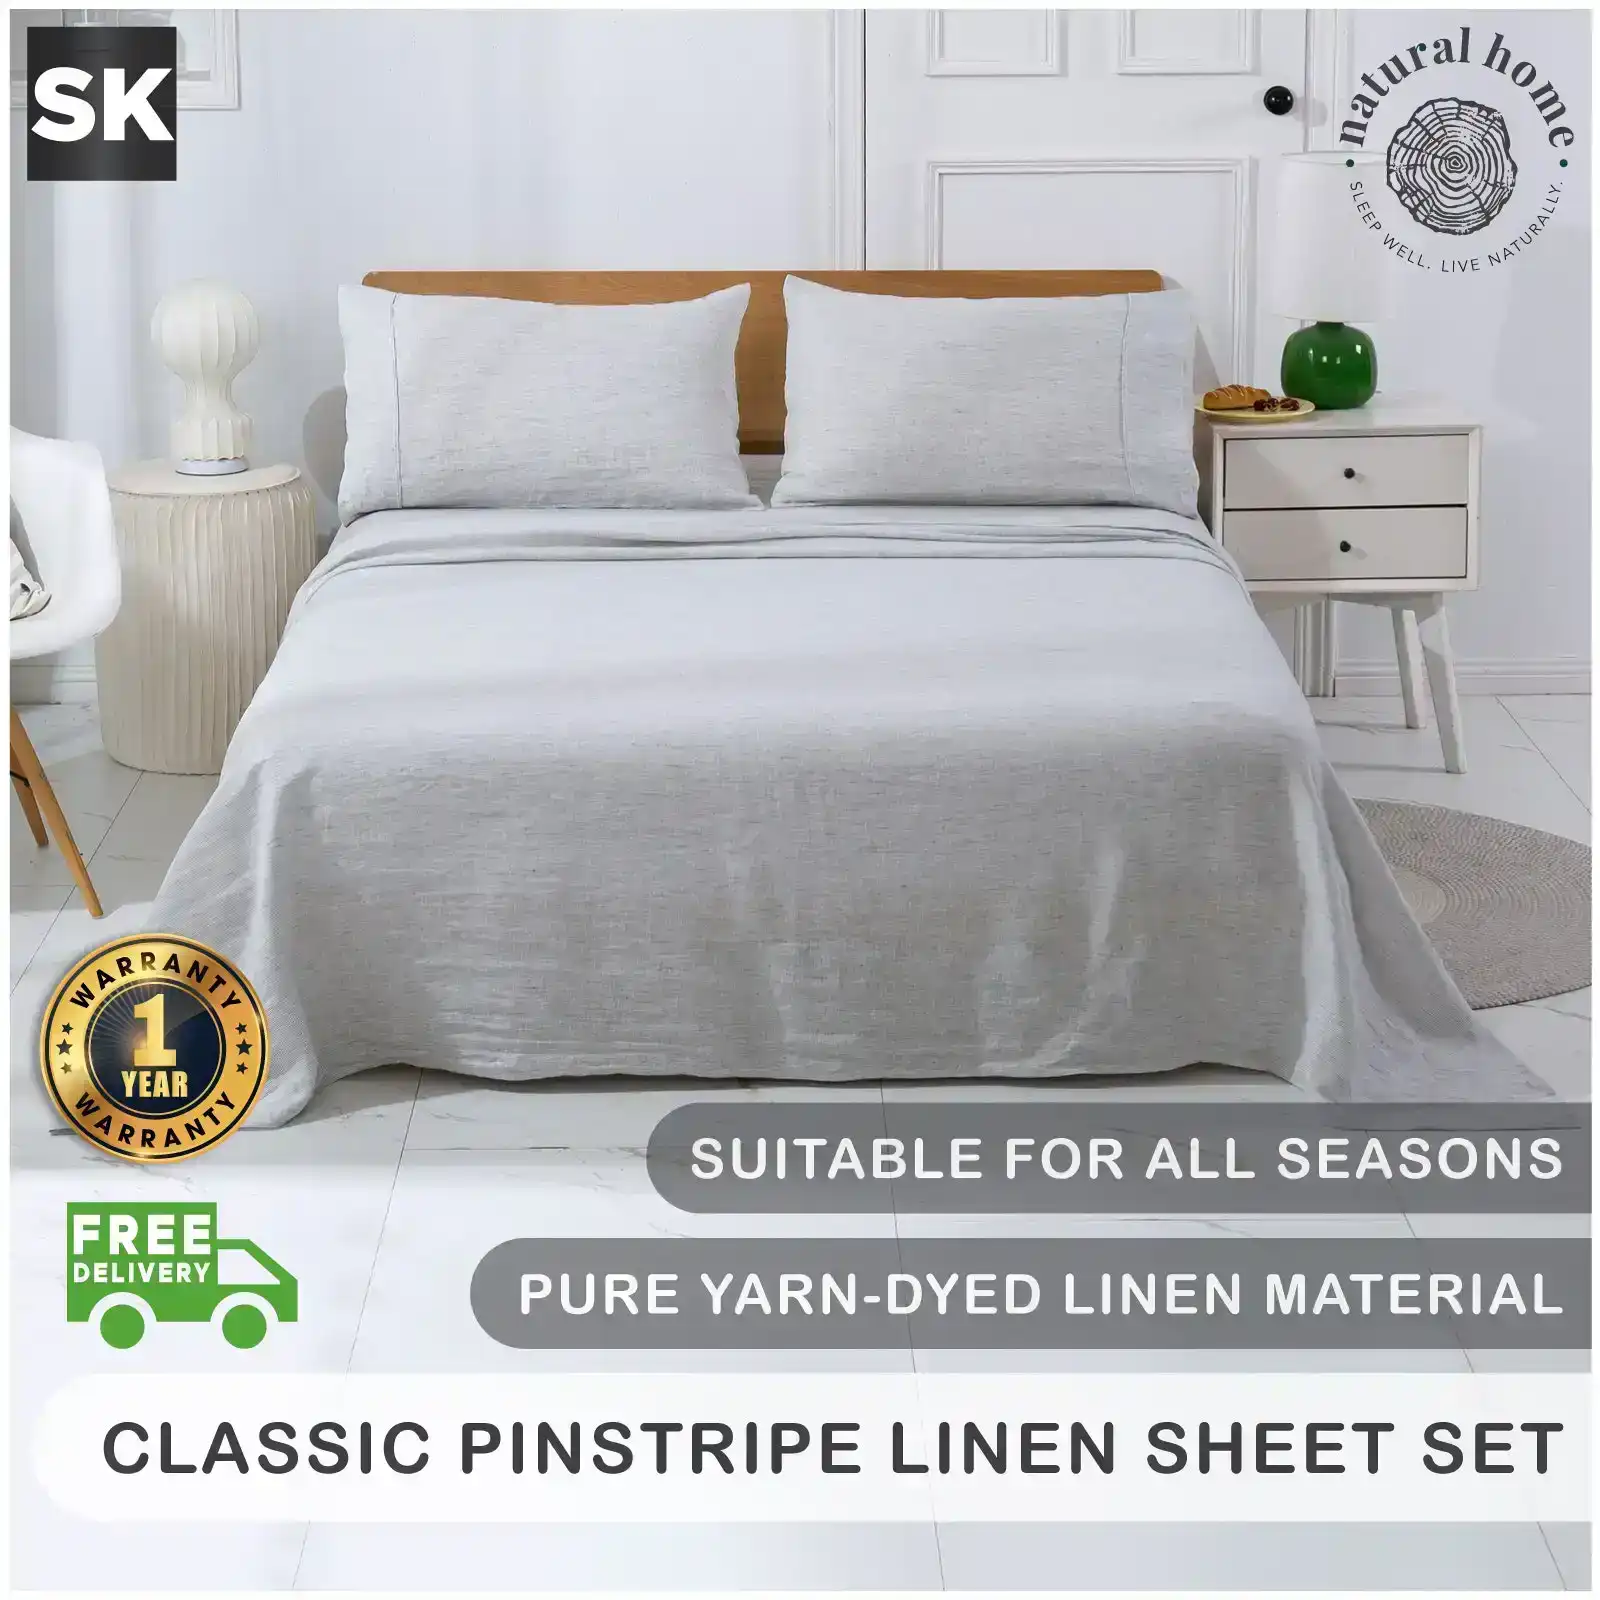 Natural Home Classic Pinstripe Linen Sheet Set White with Dark Pinstripe Super King Bed